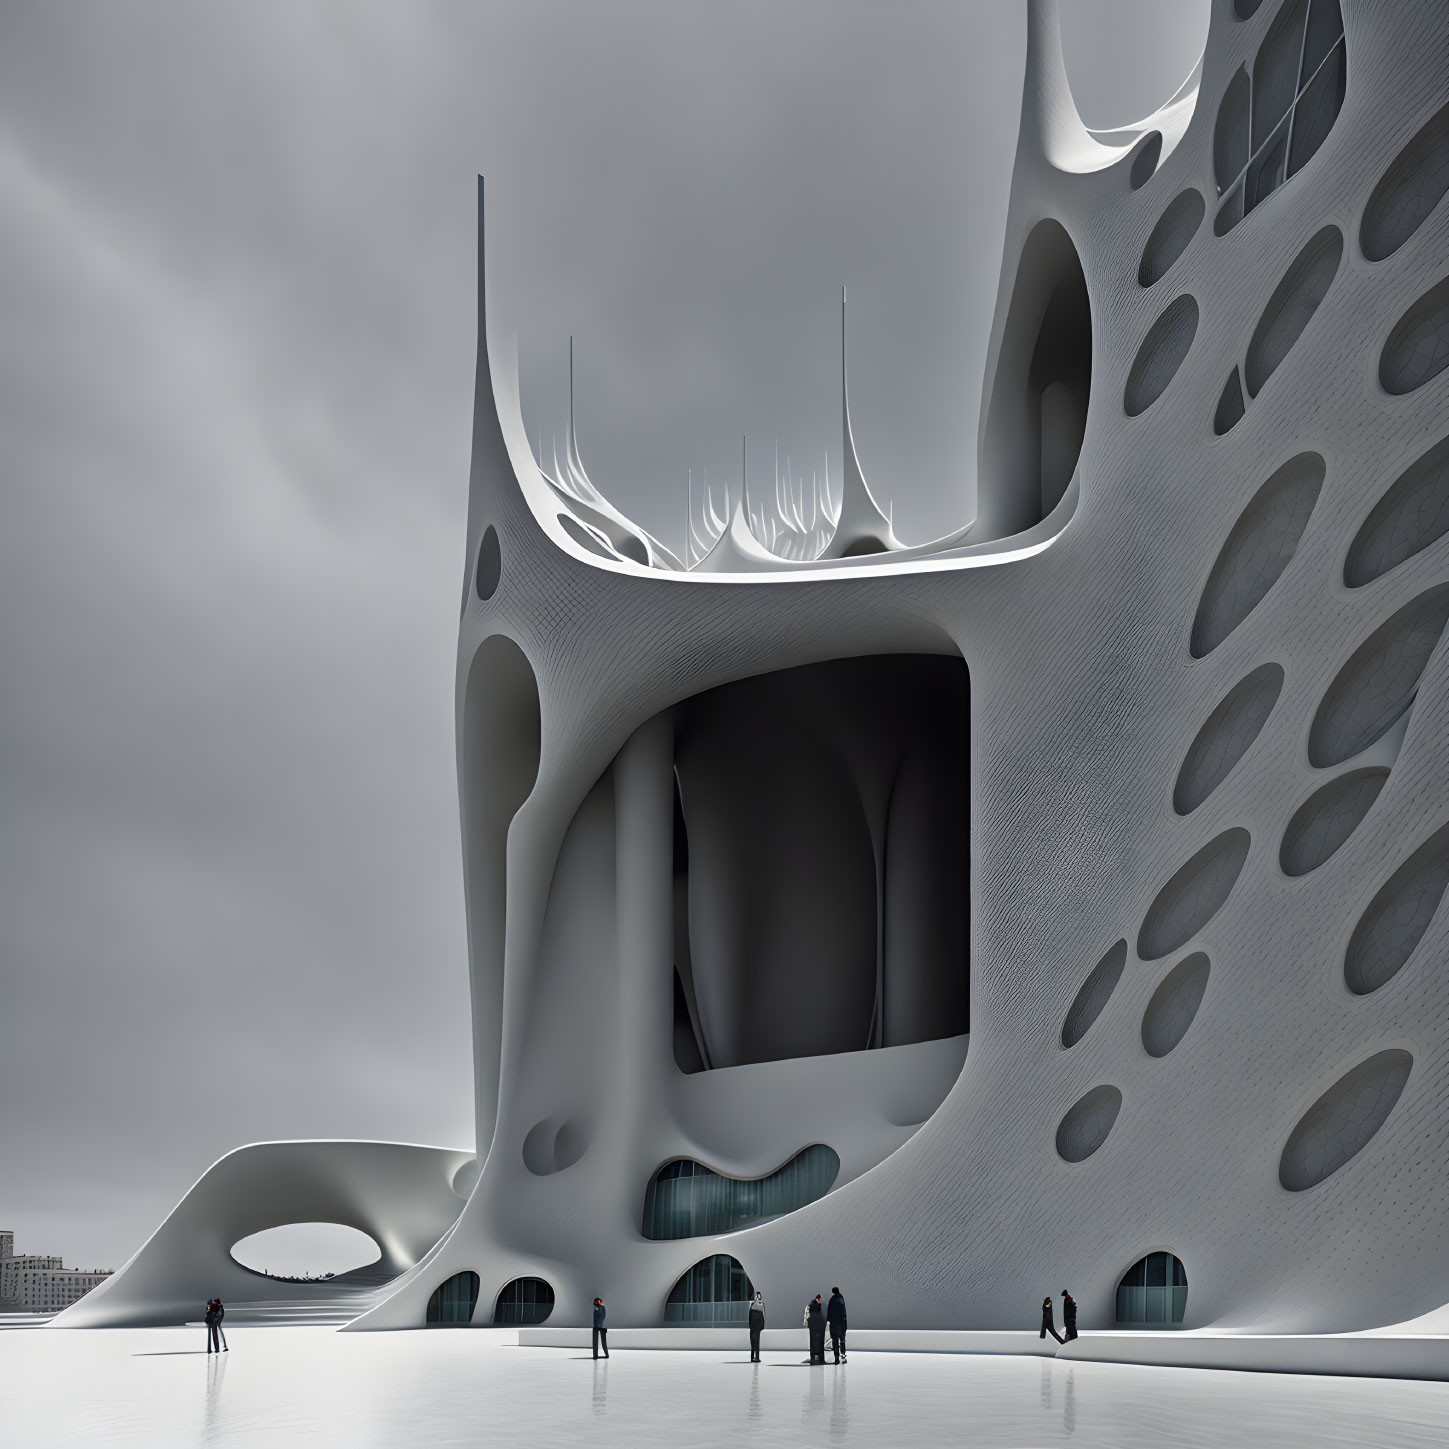 Organic Curves and Hole-Patterned Facade on Futuristic Building